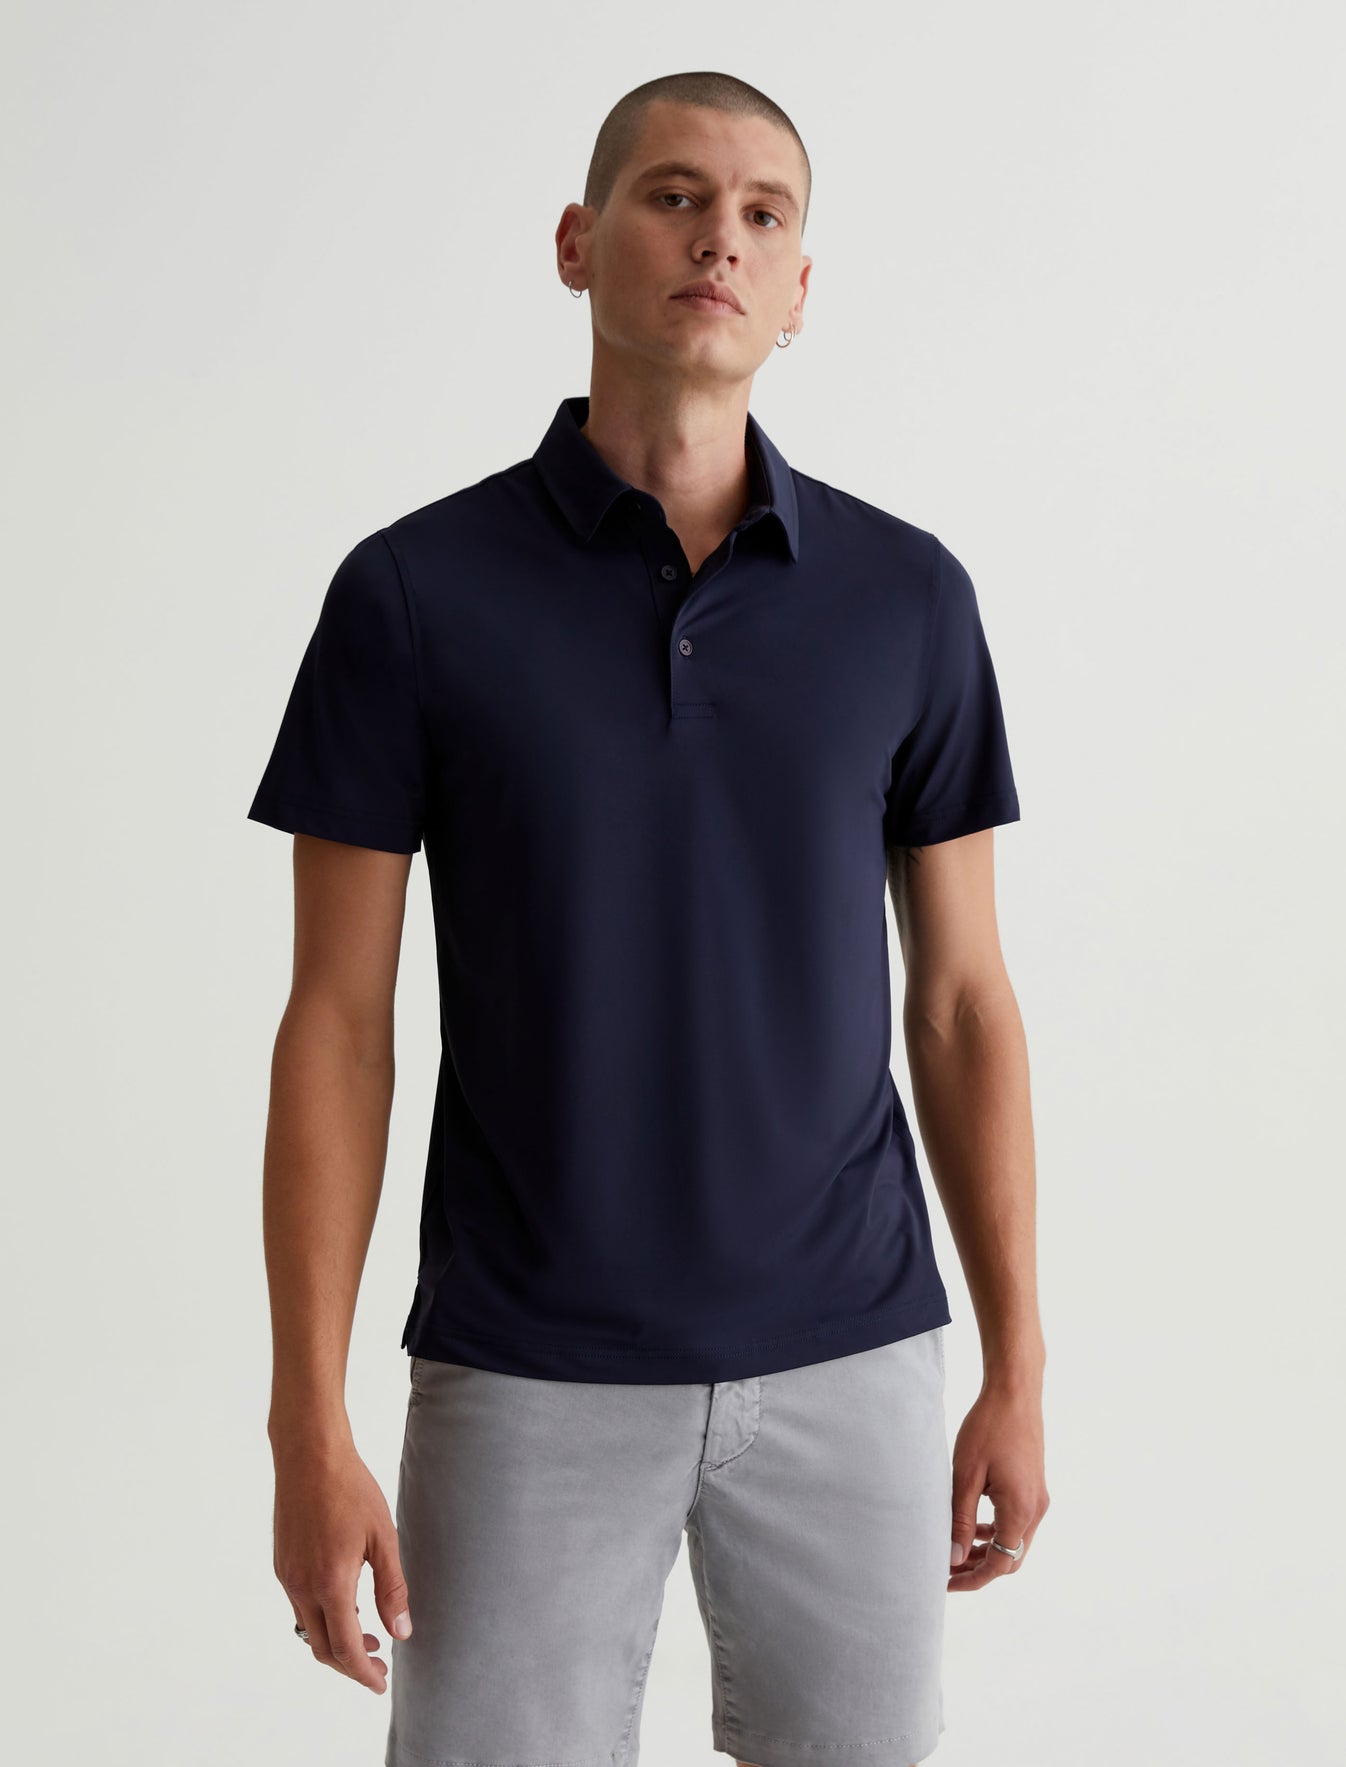 Bryce S/S Polo Deep Navy Classic Fit Short Sleeve Polo T-Shirt Mens Top Photo 1